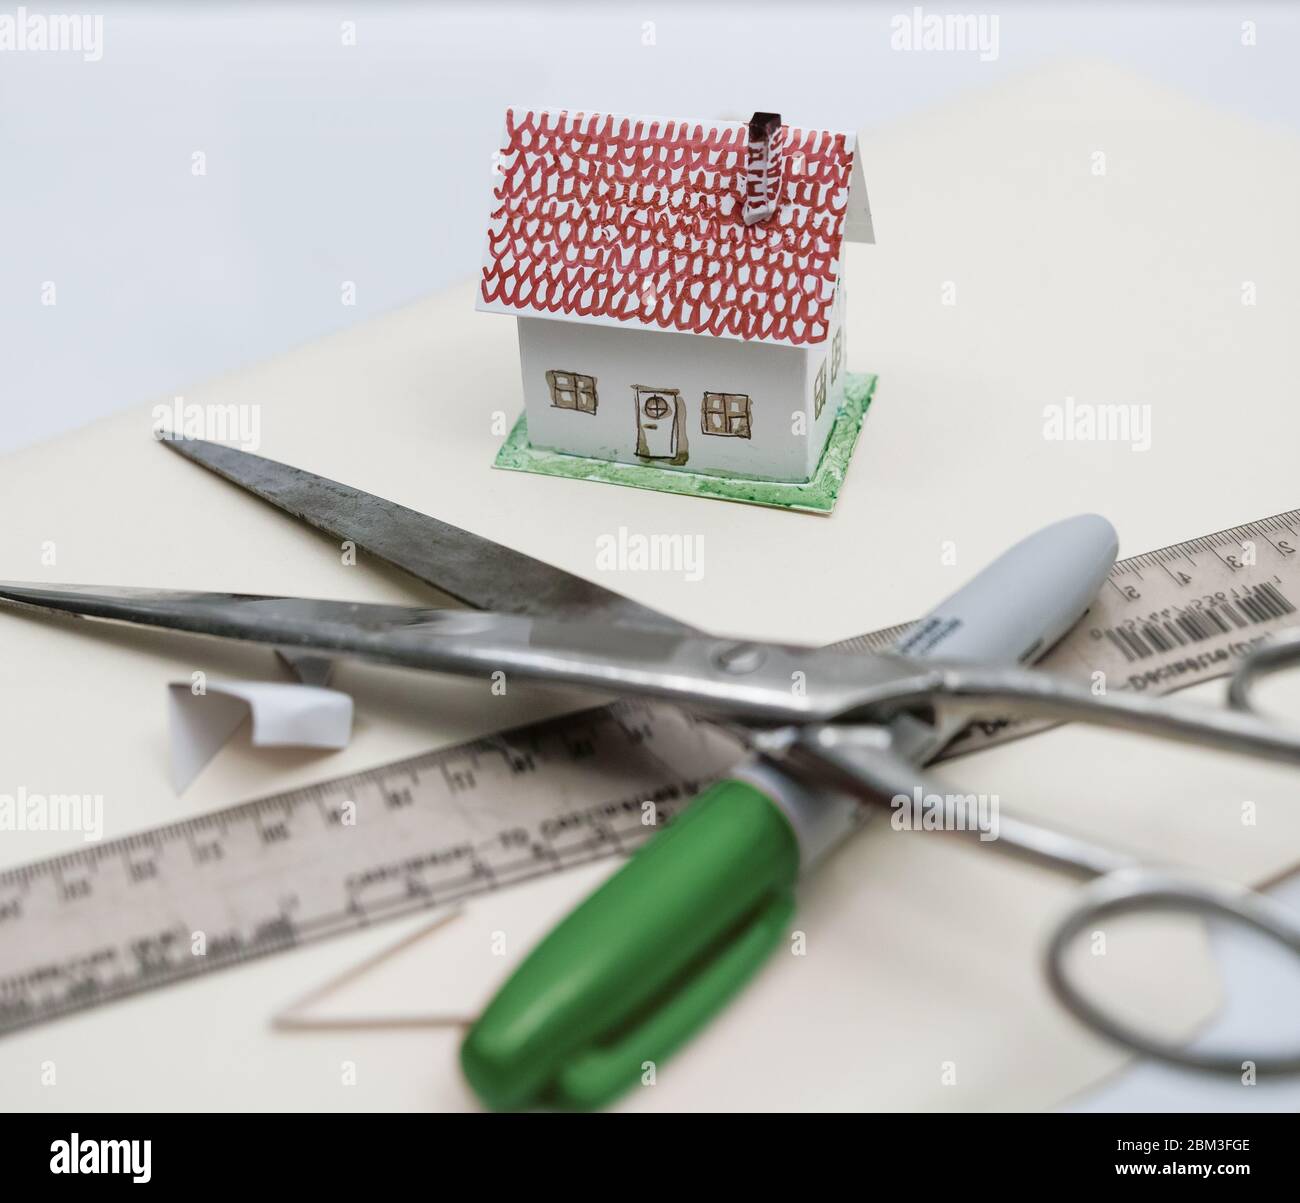 A toy house built from paper and cardboard, with tools such as a marker, scissors, ruler and glue. Stock Photo